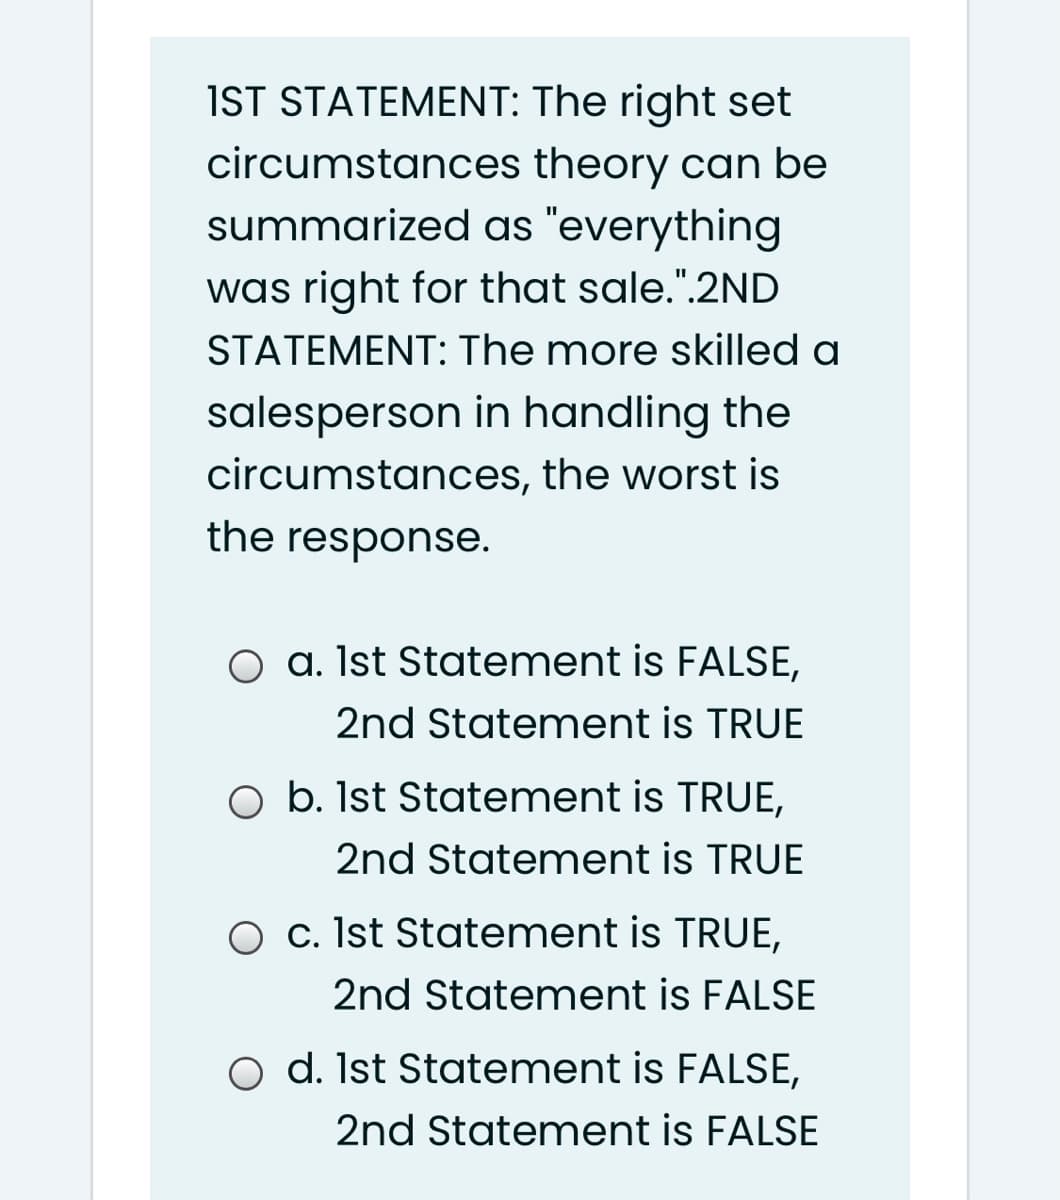 IST STATEMENT: The right set
circumstances theory can be
summarized as "everything
was right for that sale.".2ND
STATEMENT: The more skilled a
salesperson in handling the
circumstances, the worst is
the response.
O a. Ist Statement is FALSE,
2nd Statement is TRUE
O b. Ist Statement is TRUE,
2nd Statement is TRUE
O c. Ist Statement is TRUE,
2nd Statement is FALSE
O d. Ist Statement is FALSE,
2nd Statement is FALSE
